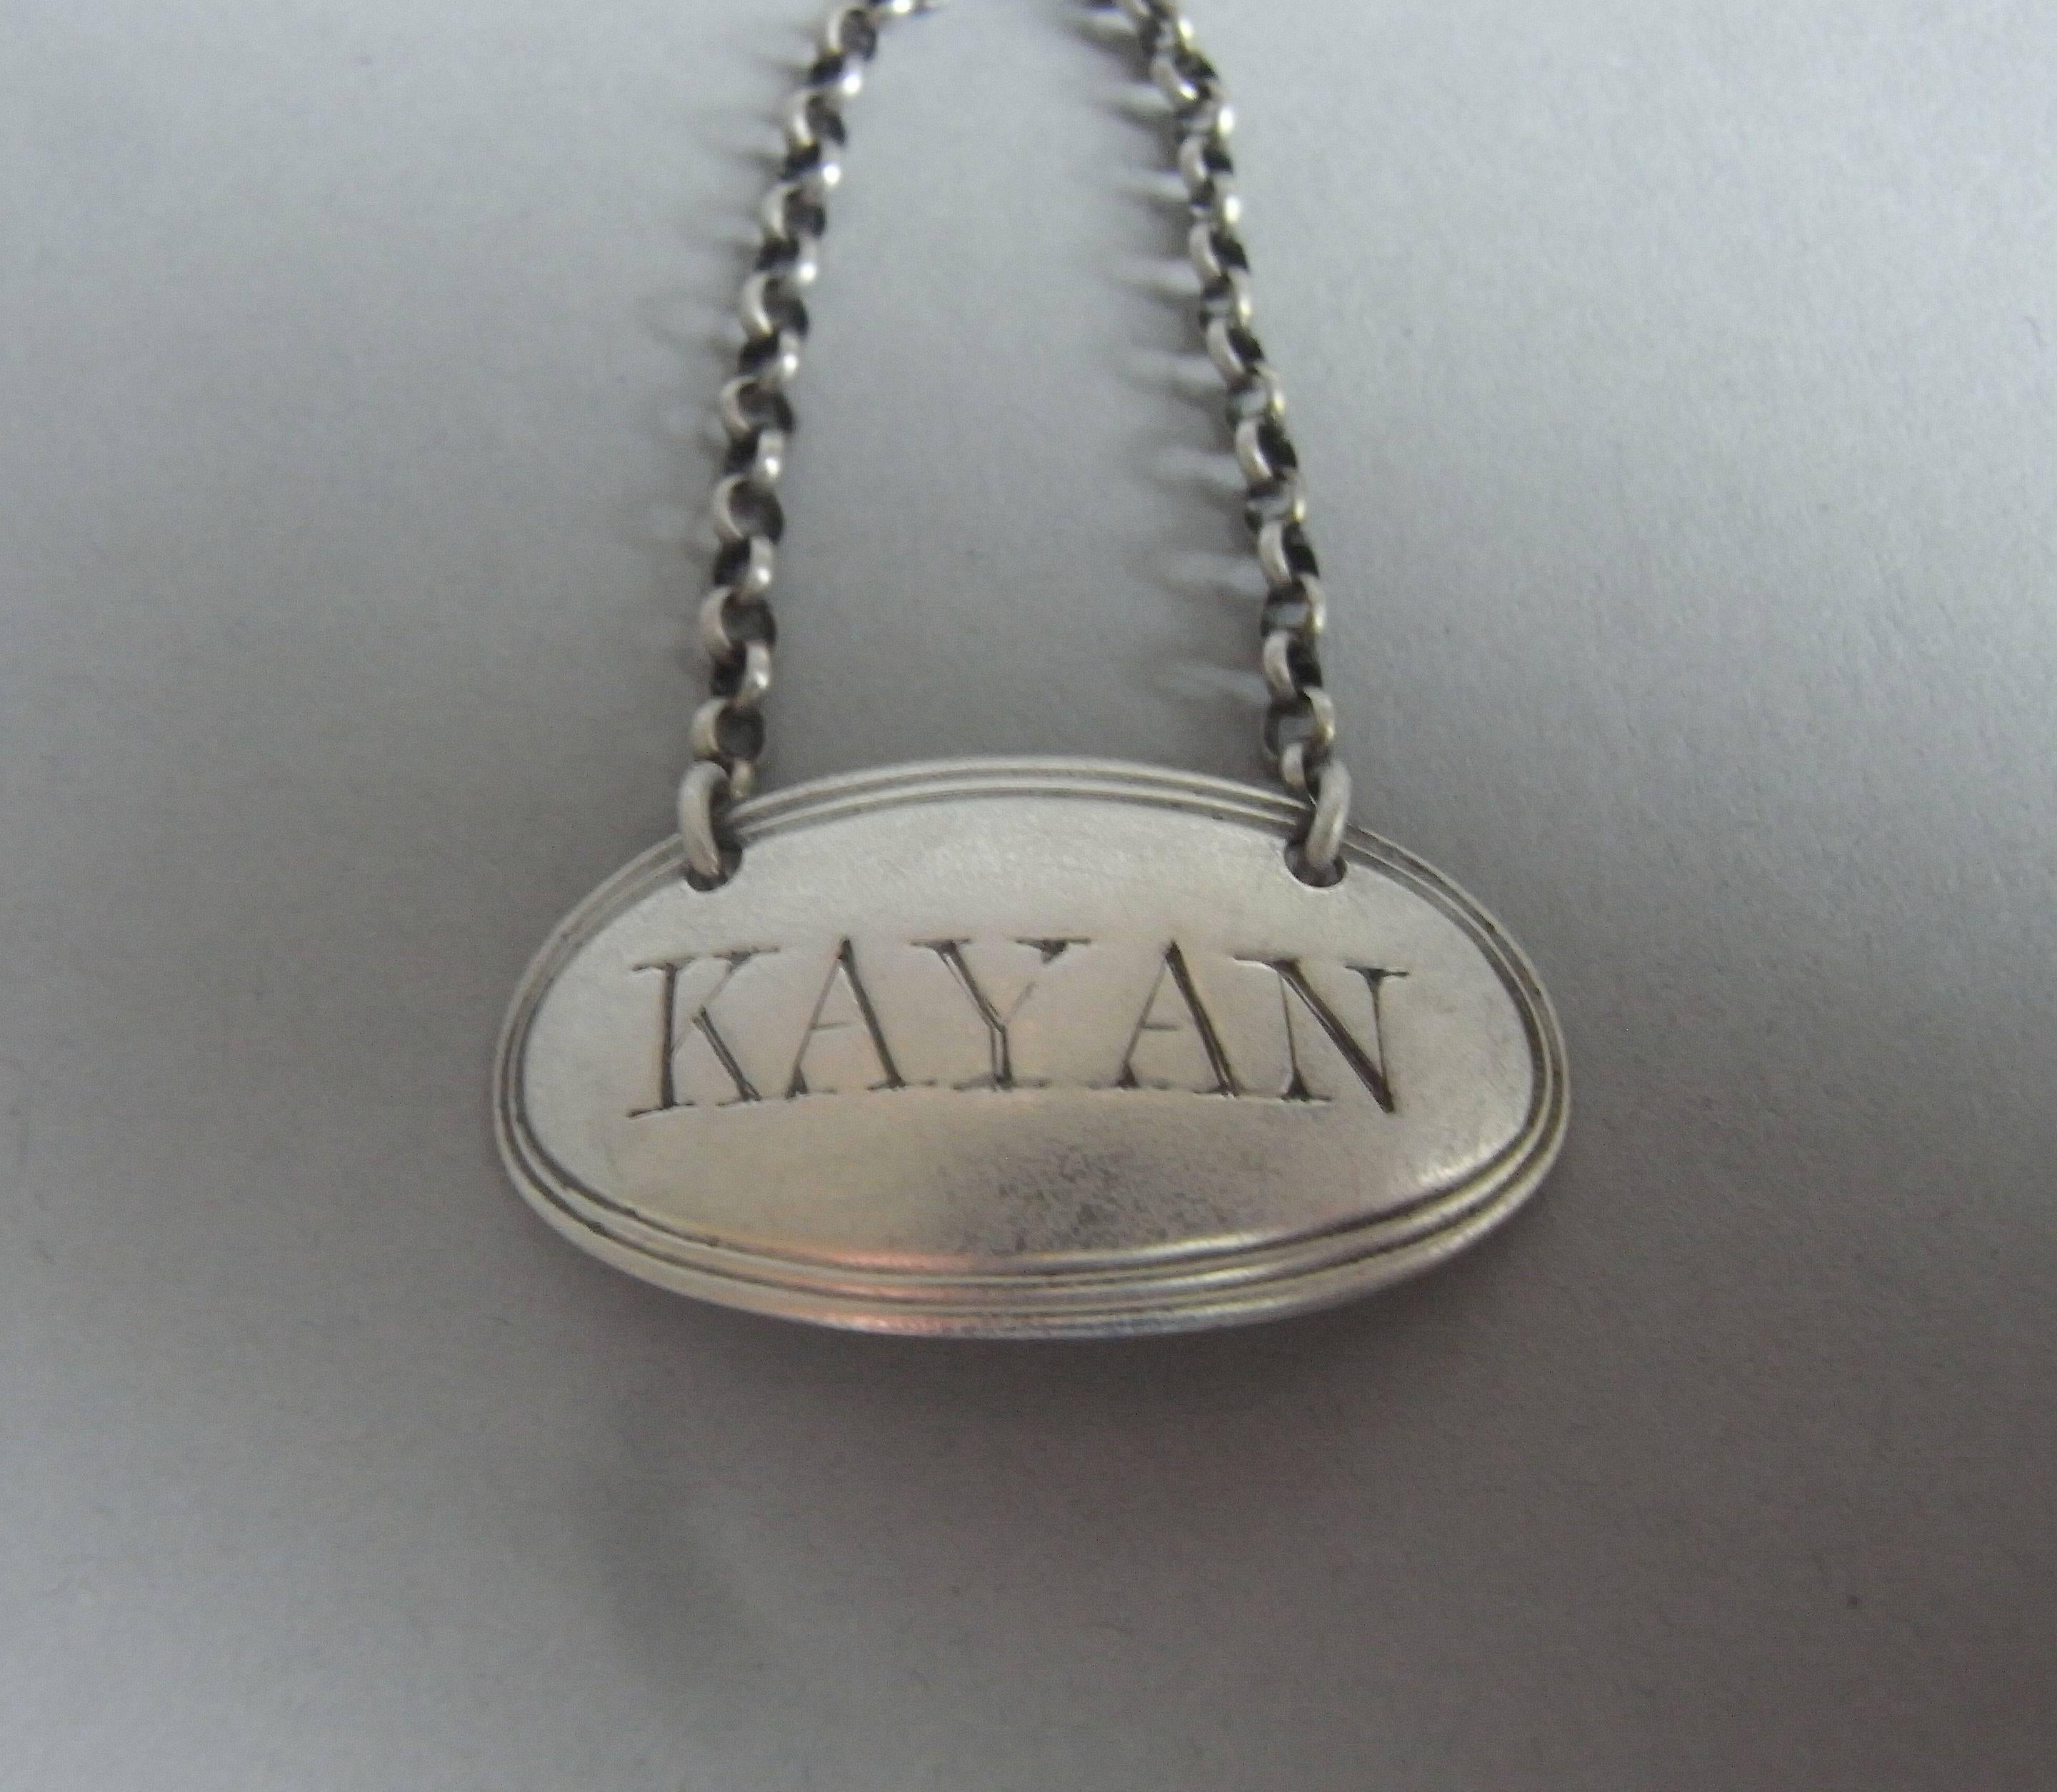 The labels have an oval rounded form and double thread edge. The set are engraved for KAYAN, SOY & KETCHUP. Each is fully marked and in excellent condition. 

Measures: Length: 1.1 inches, 2.75 cm.